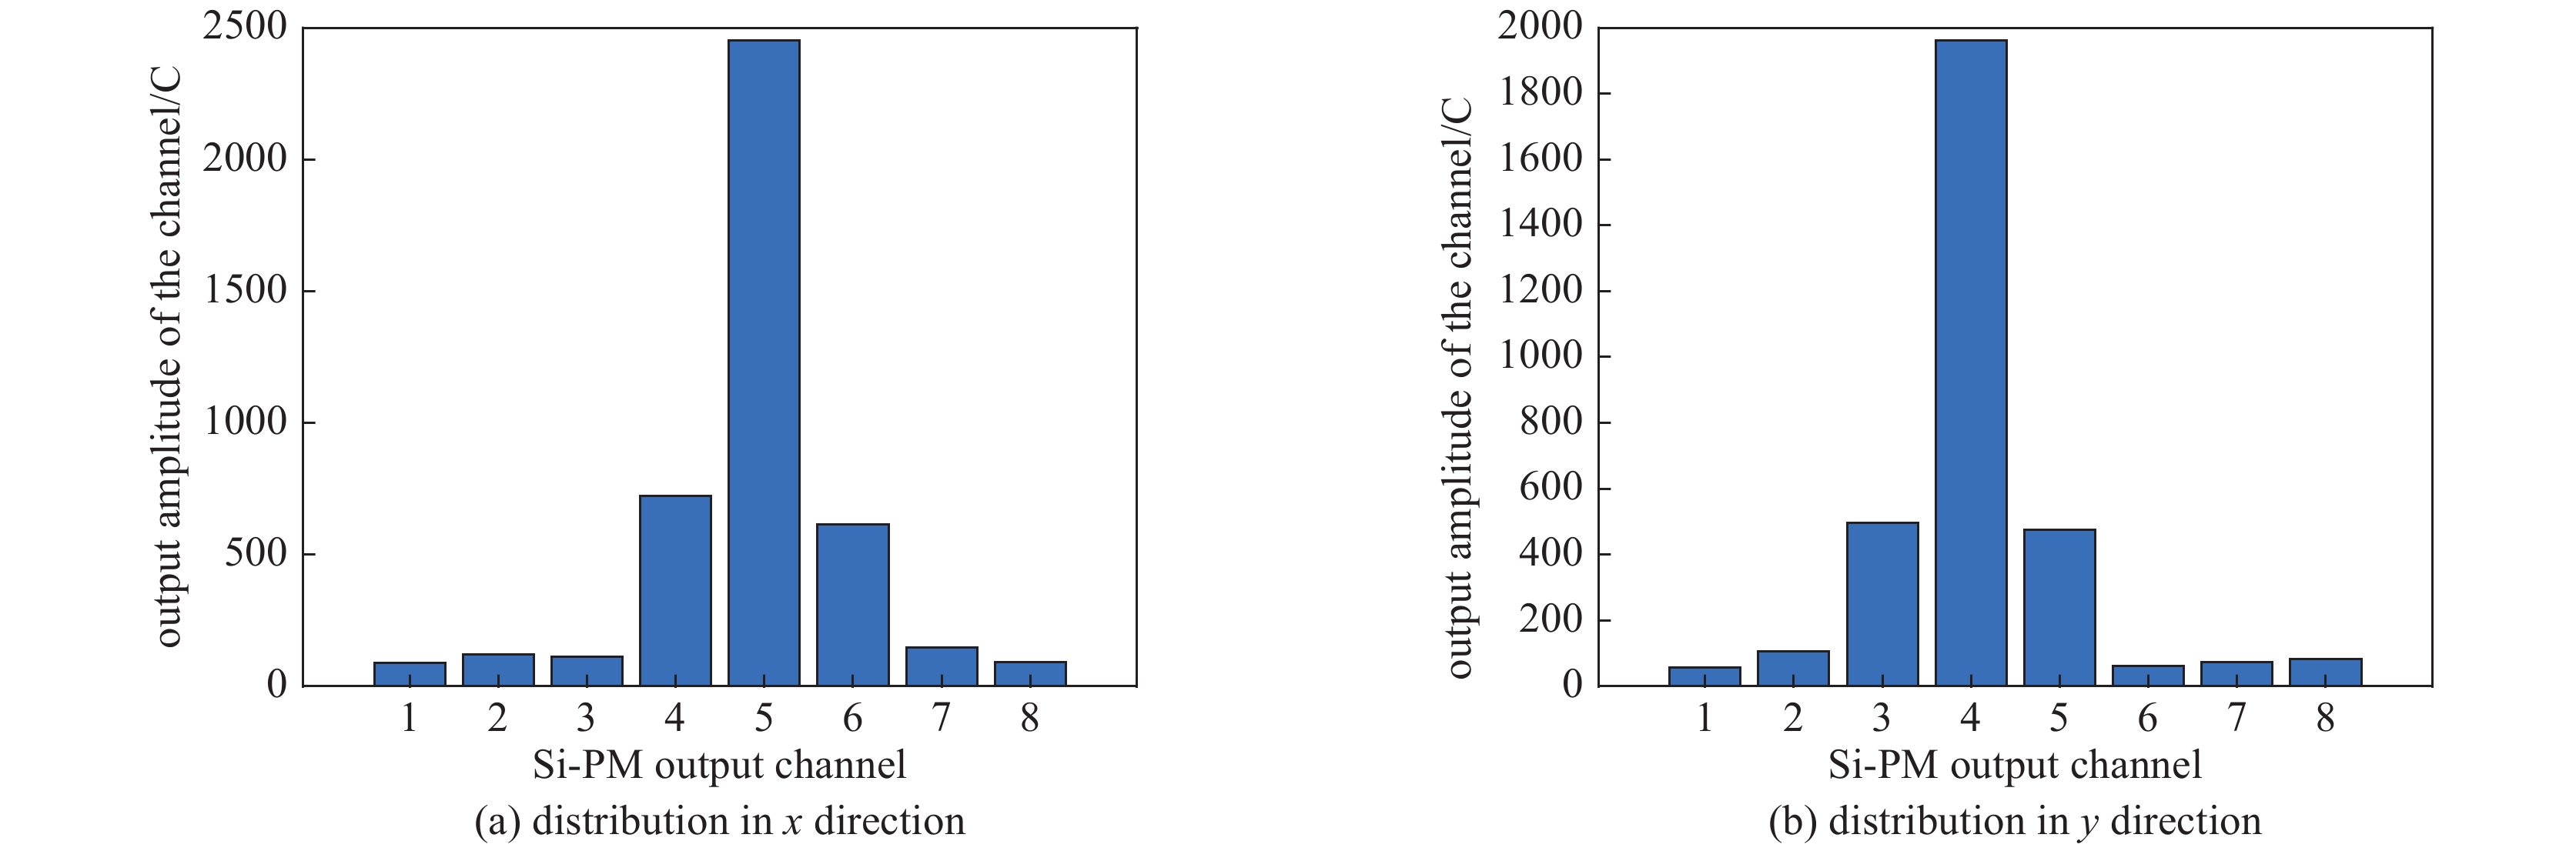 Charge distribution of radiation events